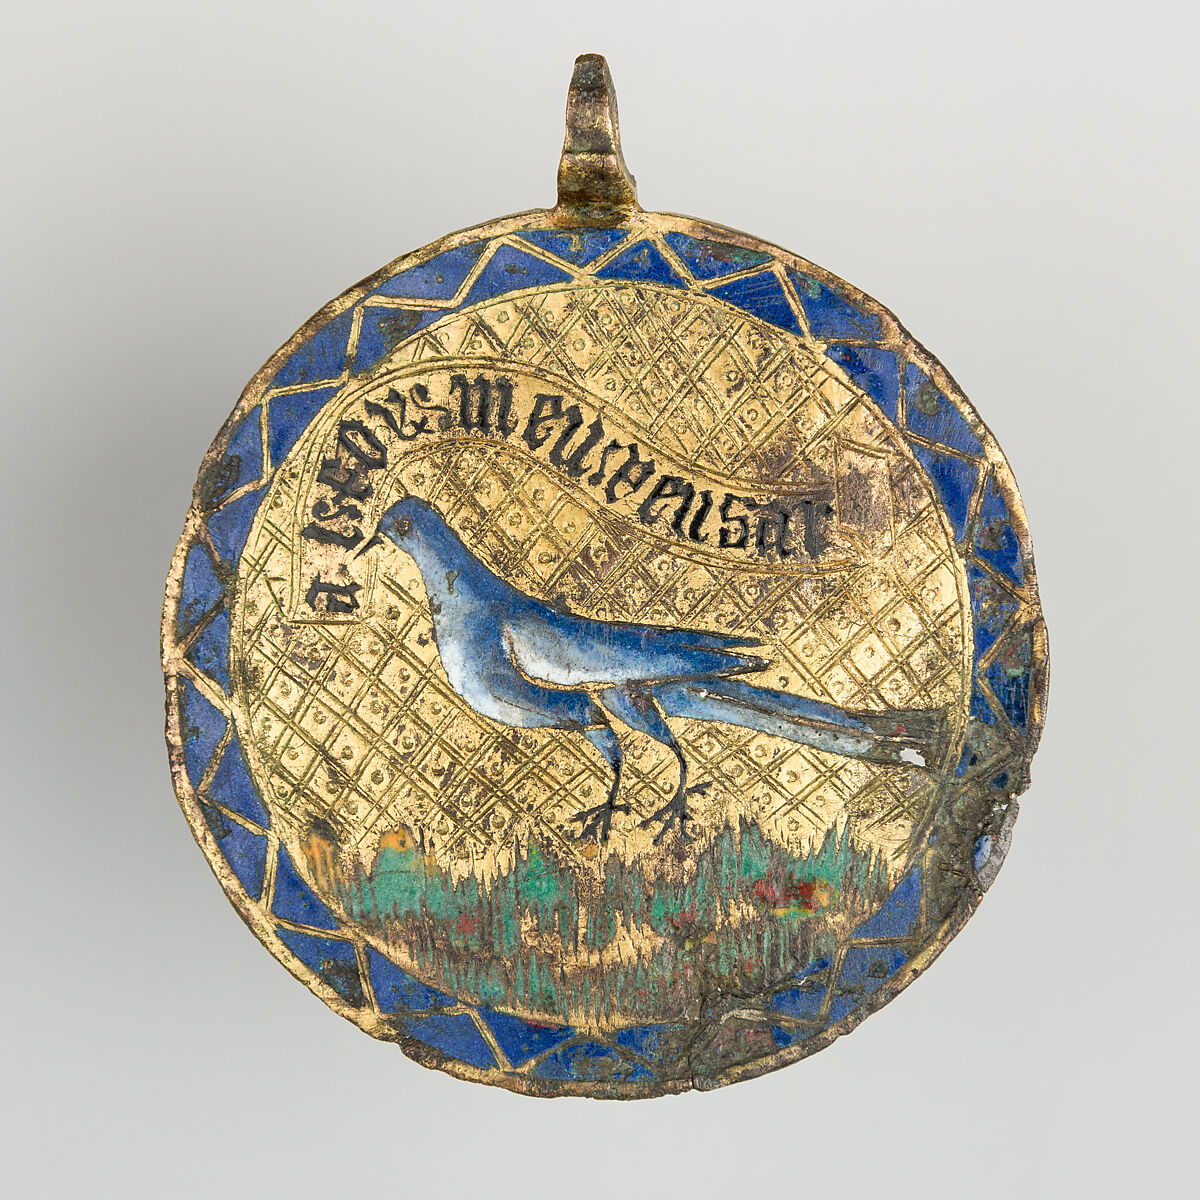 Pendant for Horse Trappings, Copper alloy, enamel, gold, Portuguese